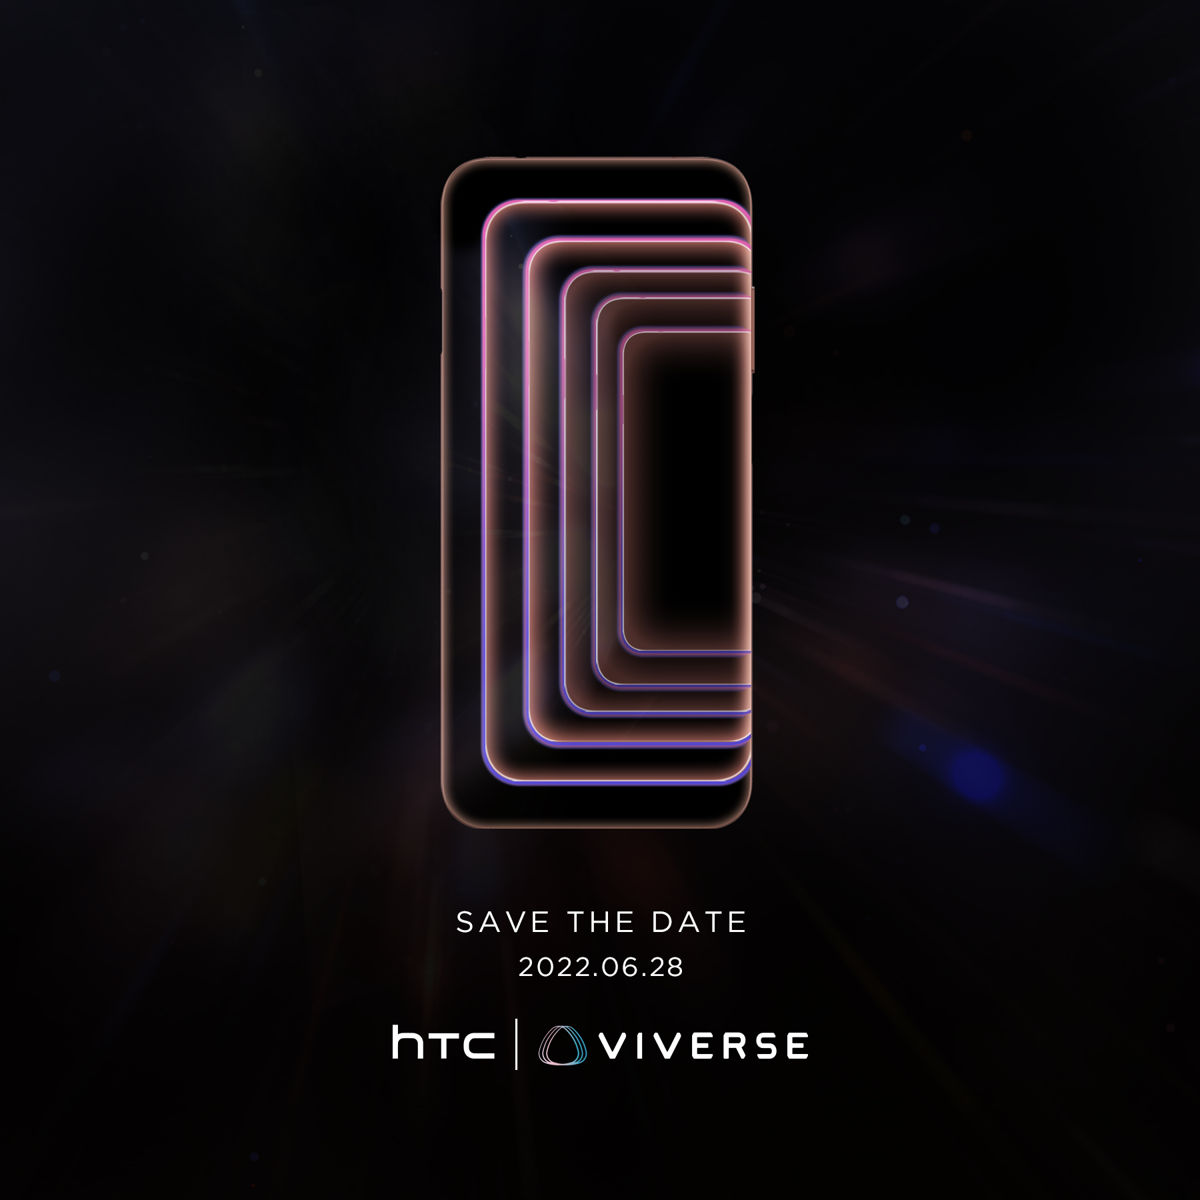 HTC's returning with another phone on the 28th of June